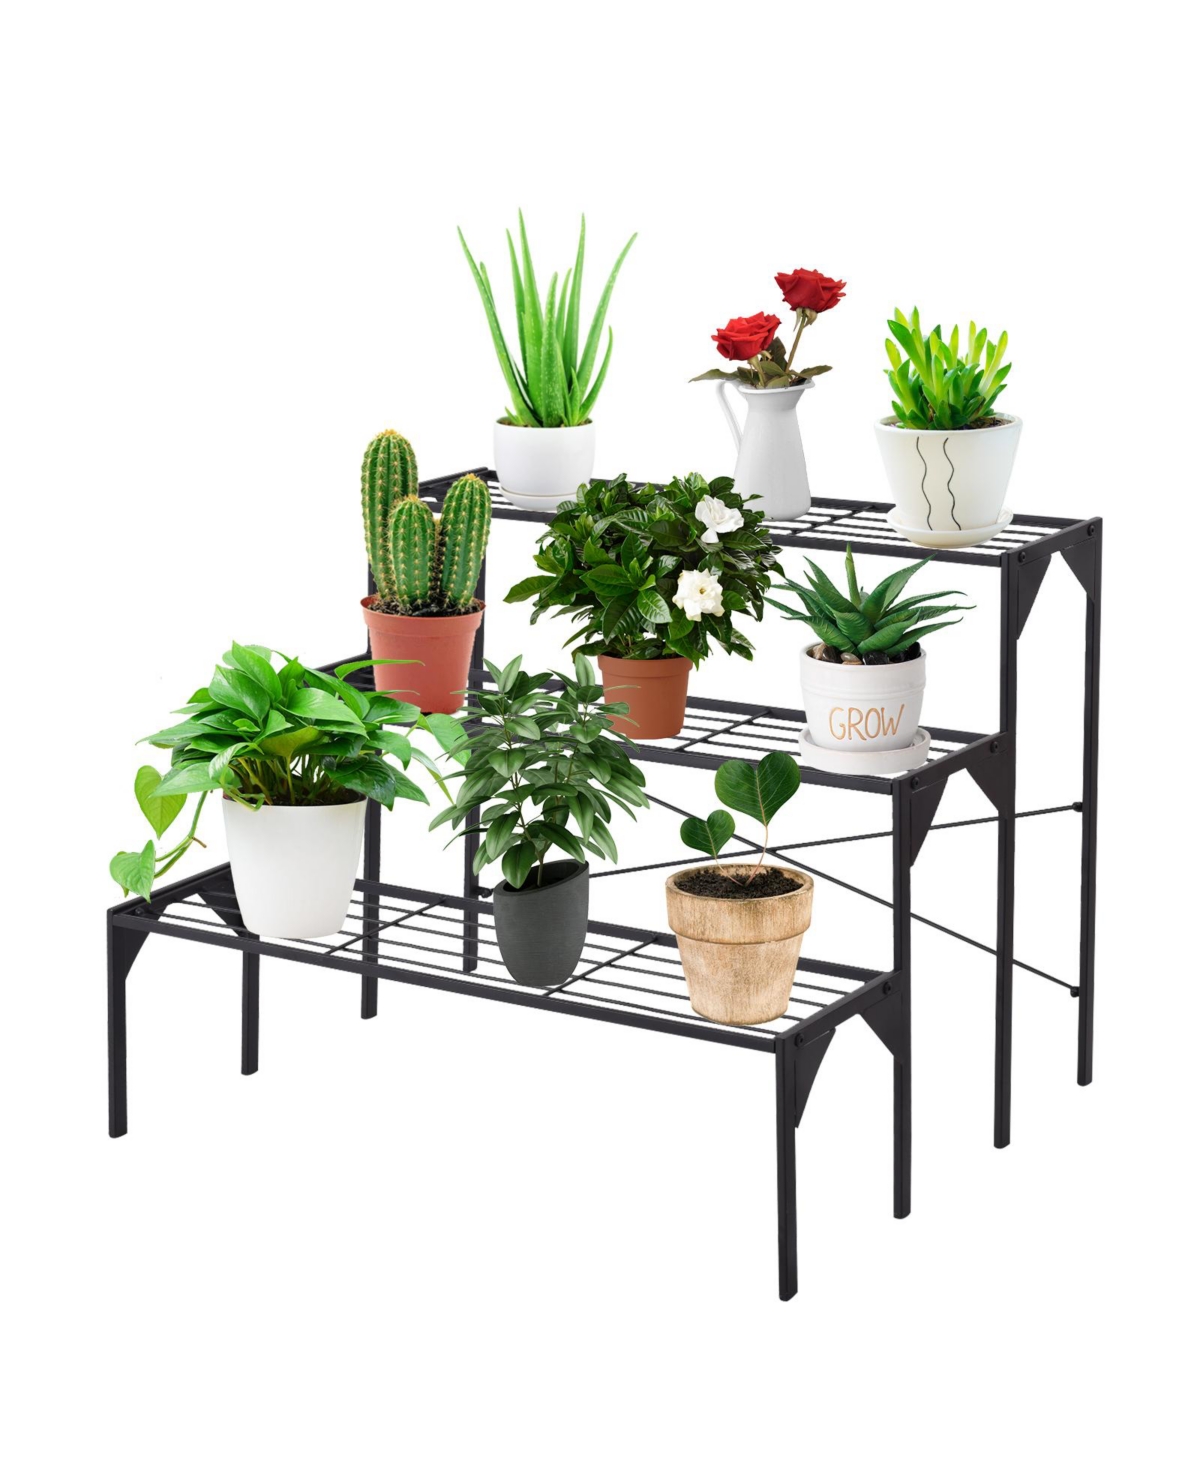 3 Tier Outdoor Metal Heavy Duty Modern for Multiple Plant Display Stand Rack - Black